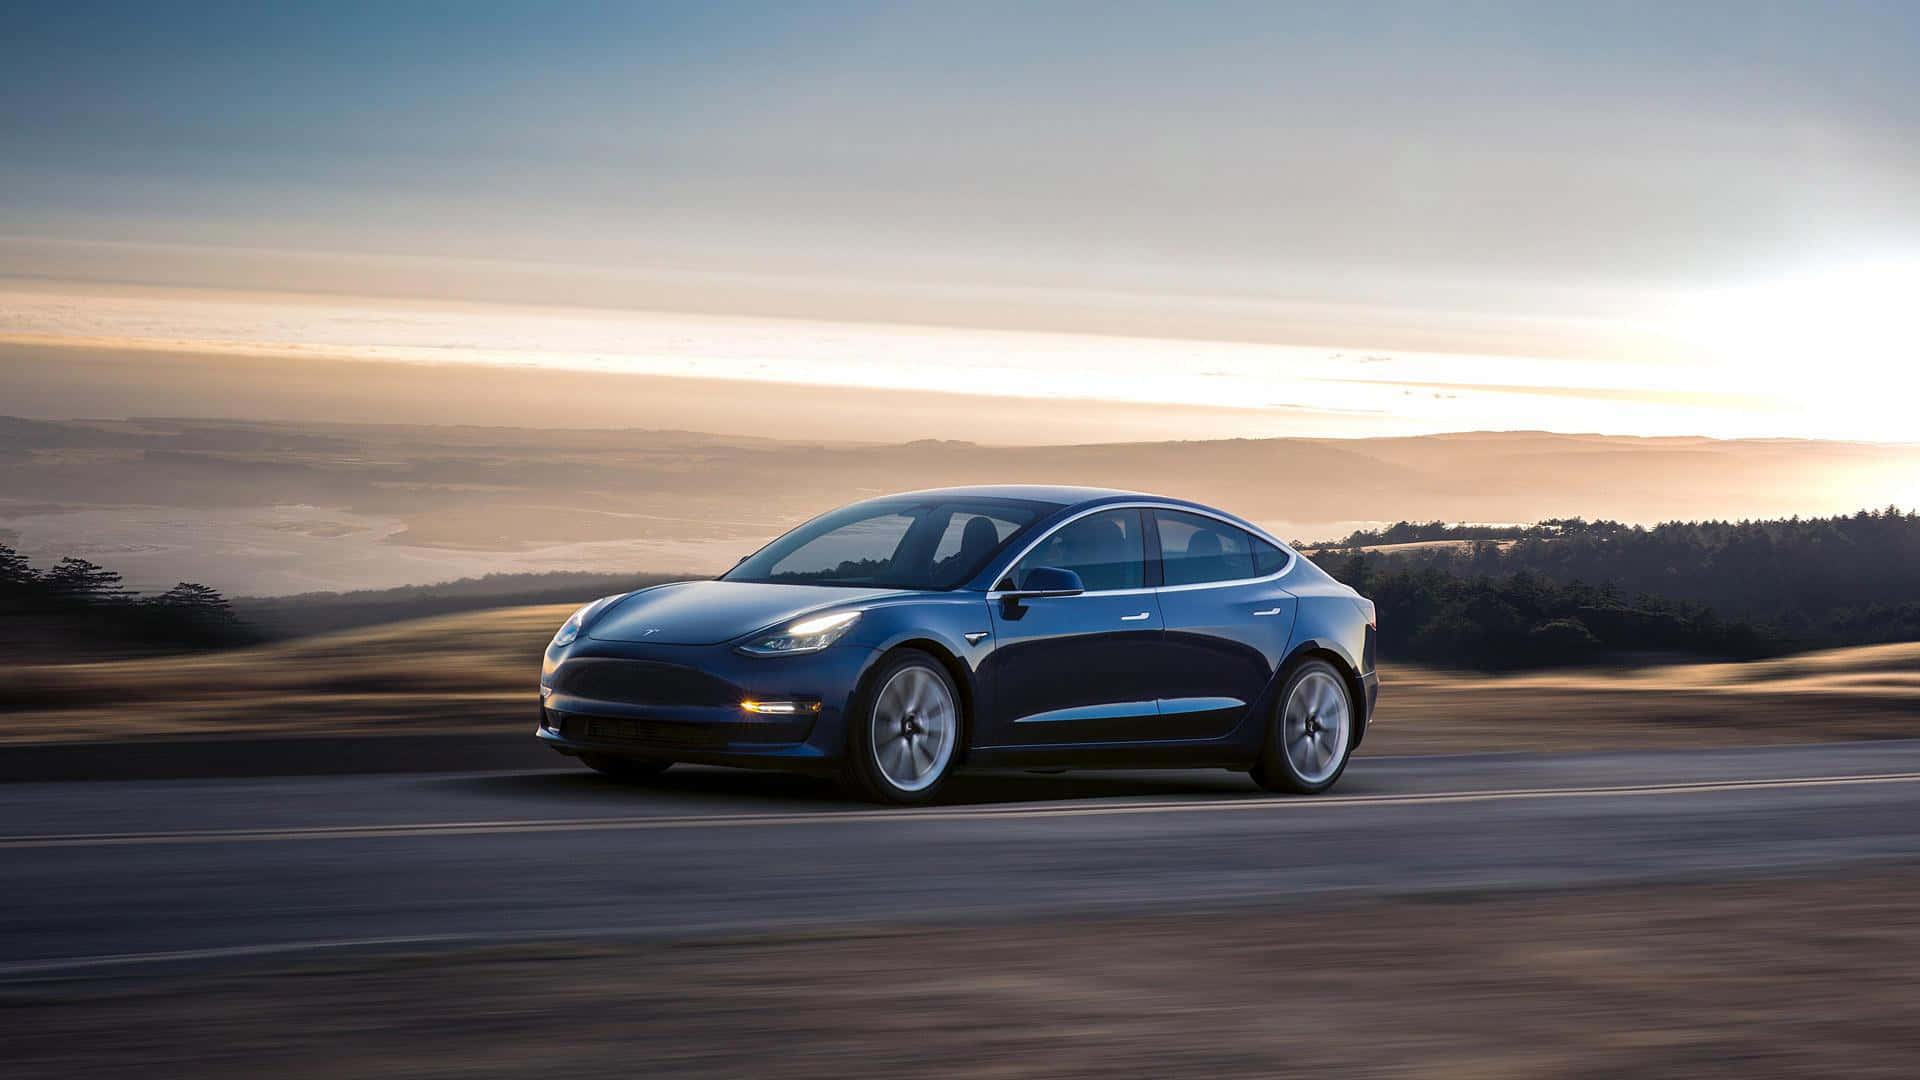 The Tesla Model 3 - Pioneering The Future of Electric Cars